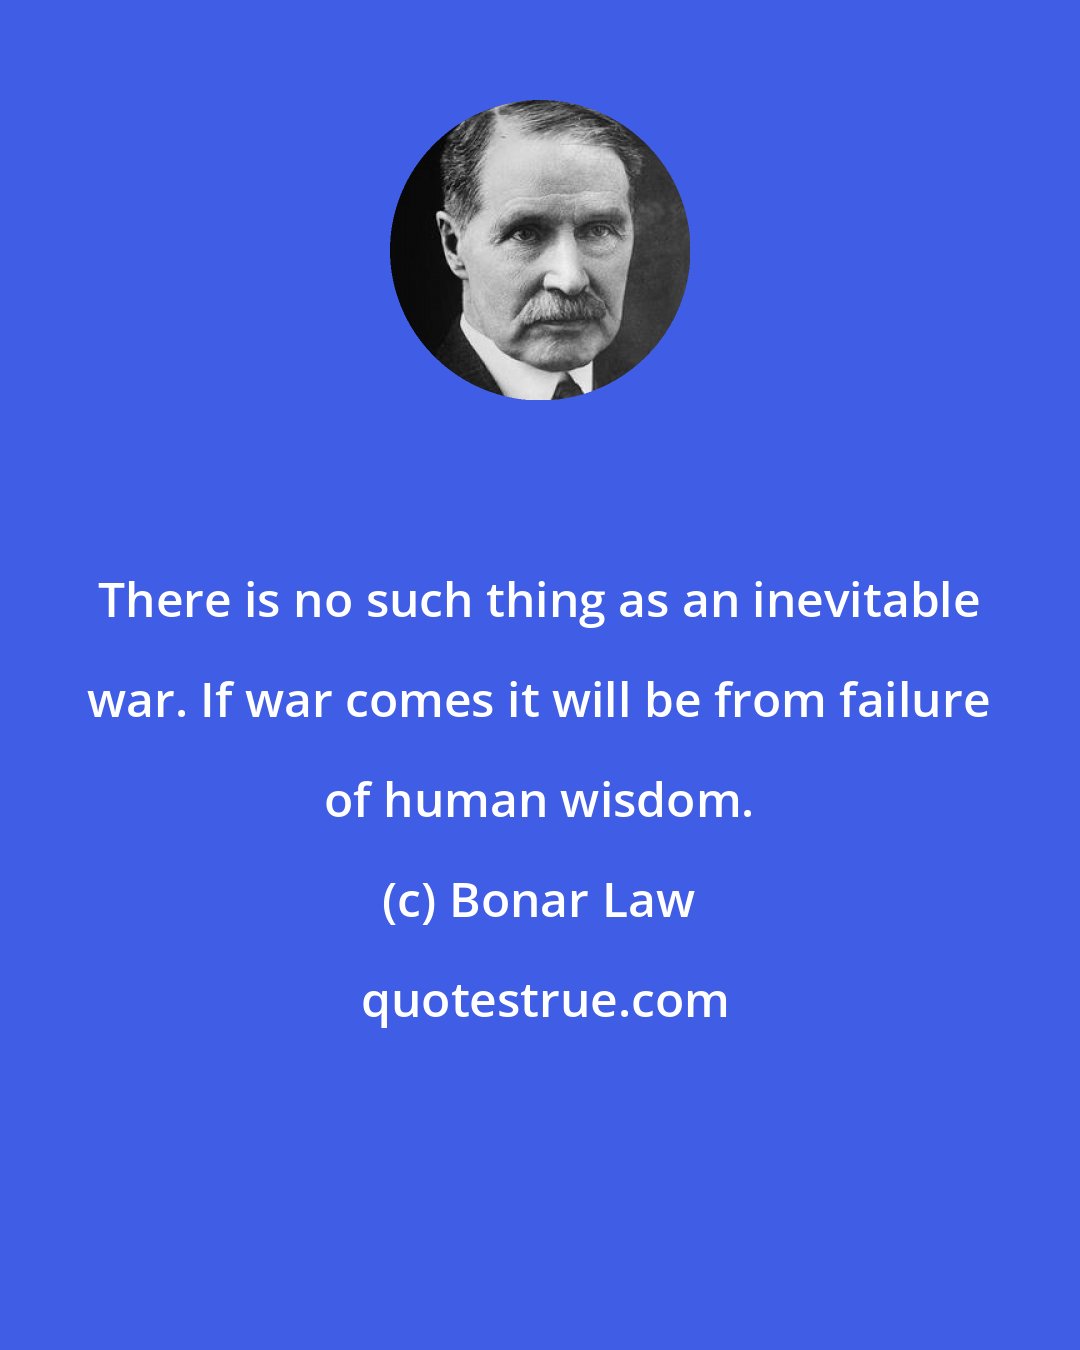 Bonar Law: There is no such thing as an inevitable war. If war comes it will be from failure of human wisdom.